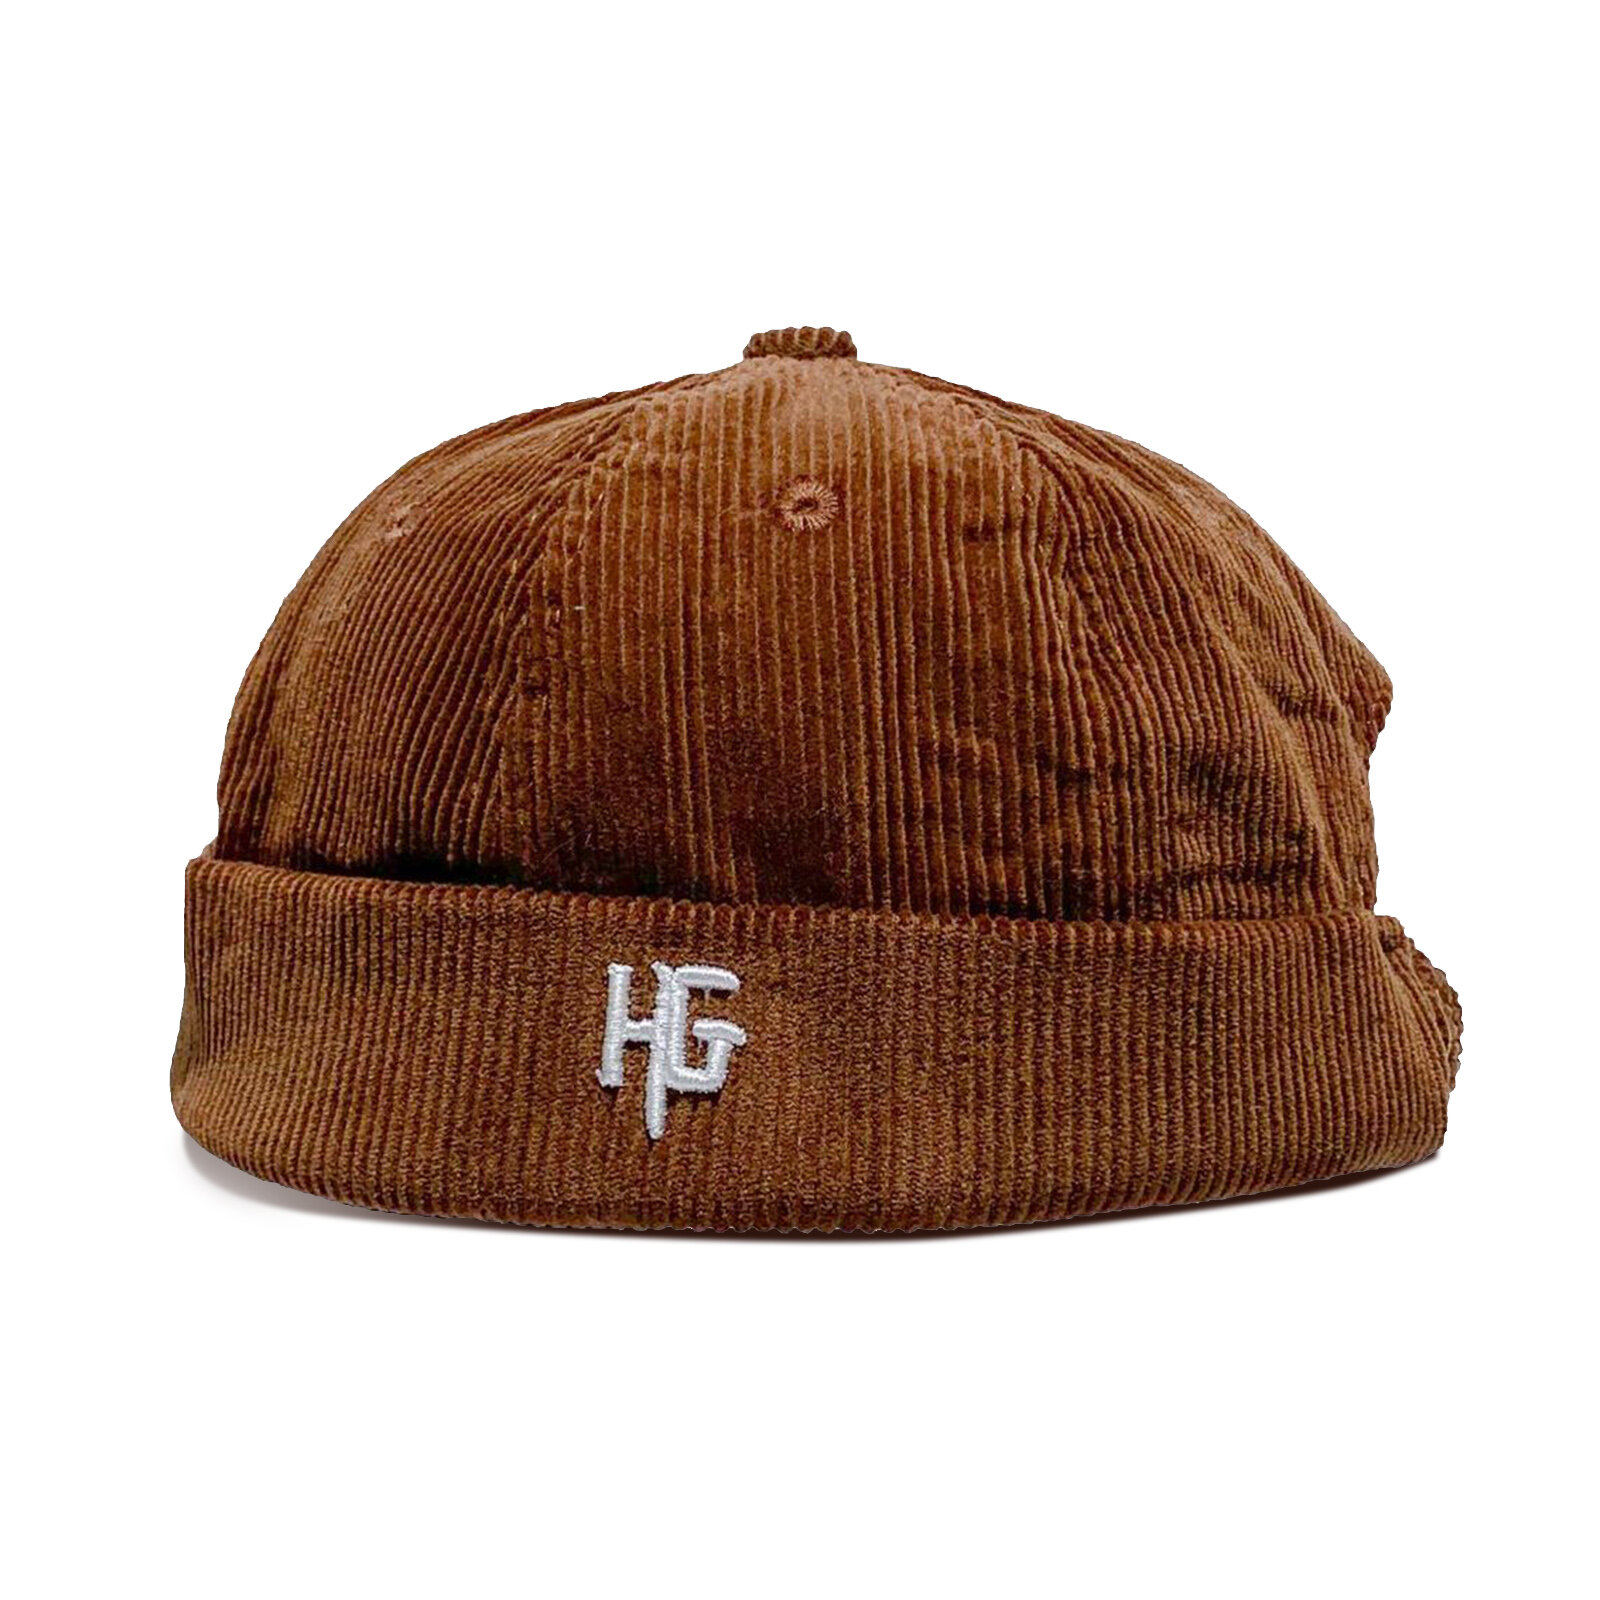 Unisex Corduroy Embroidered H G Patten Casual Brimless Beanie Landlord Hat Skull Cap